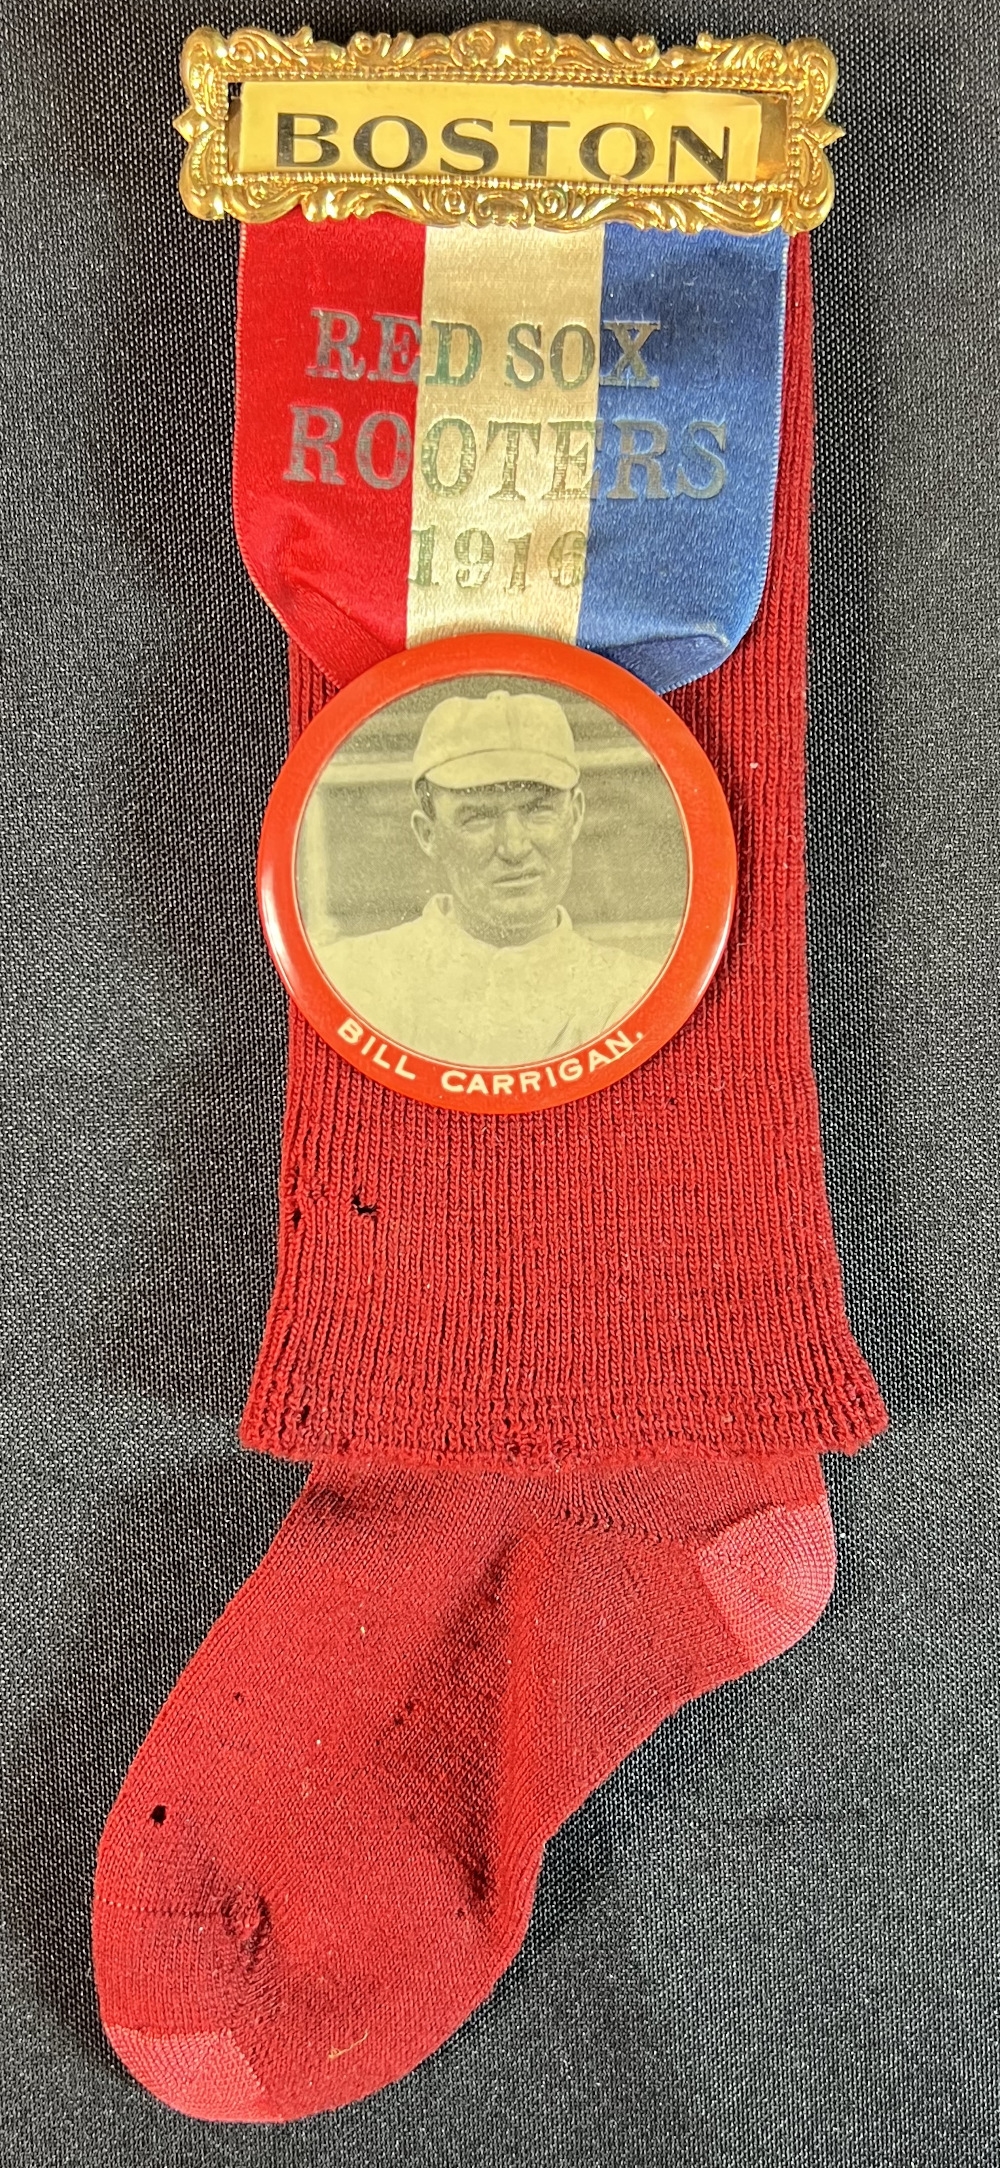 Hake's - 1916 BOSTON RED SOX ROOTERS/BILL CARRIGAN RIBBON BADGE W/BUTTON &  STOCKING.